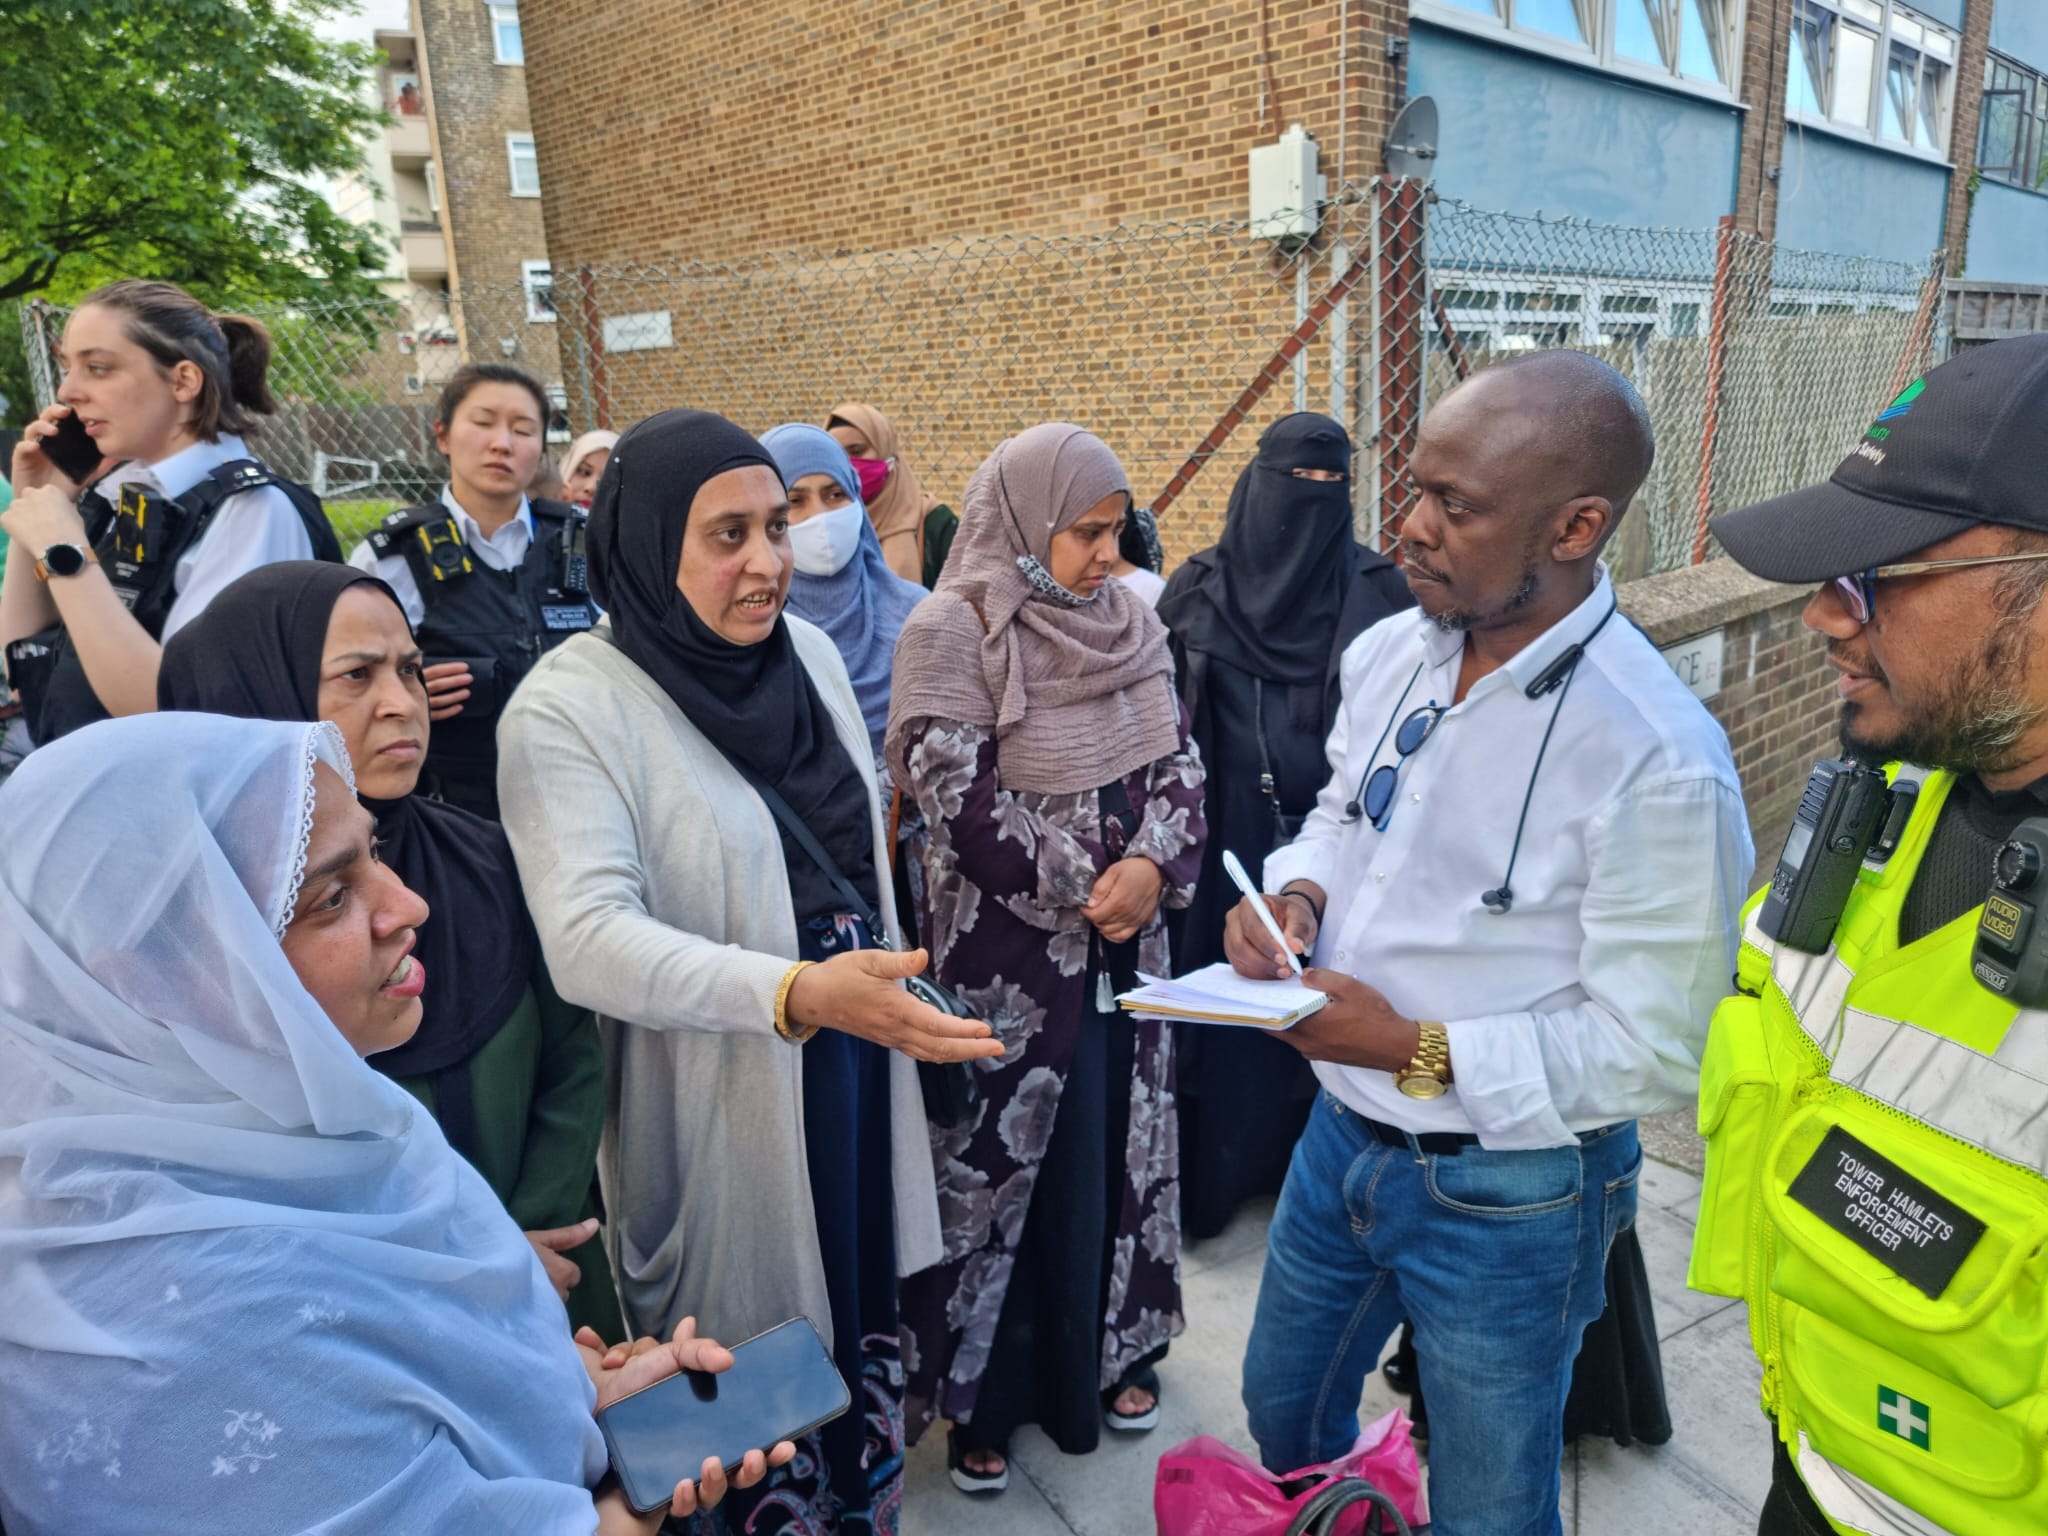 Local people discussing community safety with Tower Hamlets enforcement officers